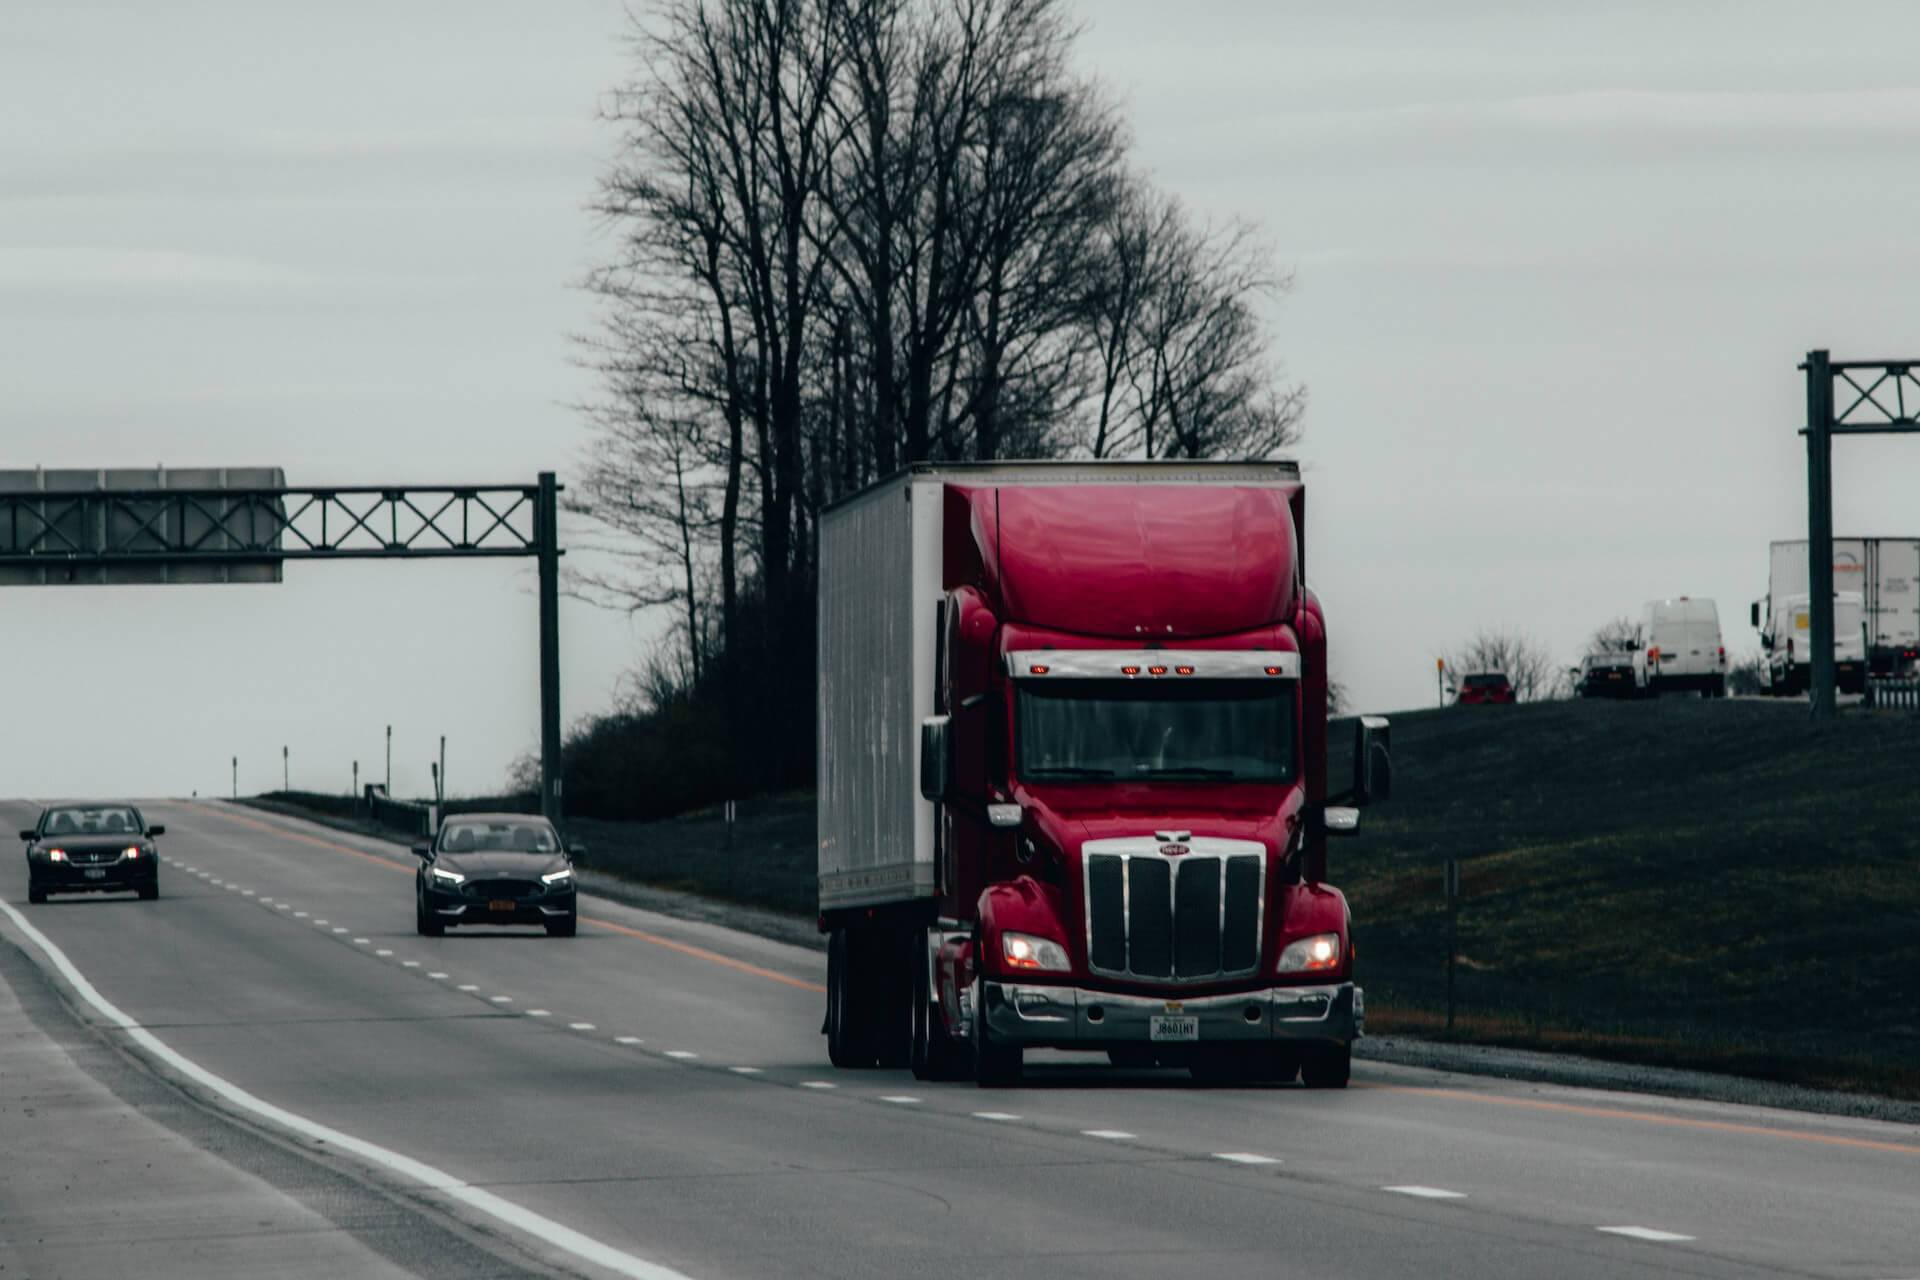 A red semi-tractor-trailer truck on the highway with a few other passenger cars. The weather is overcast but the road is dry and clear.